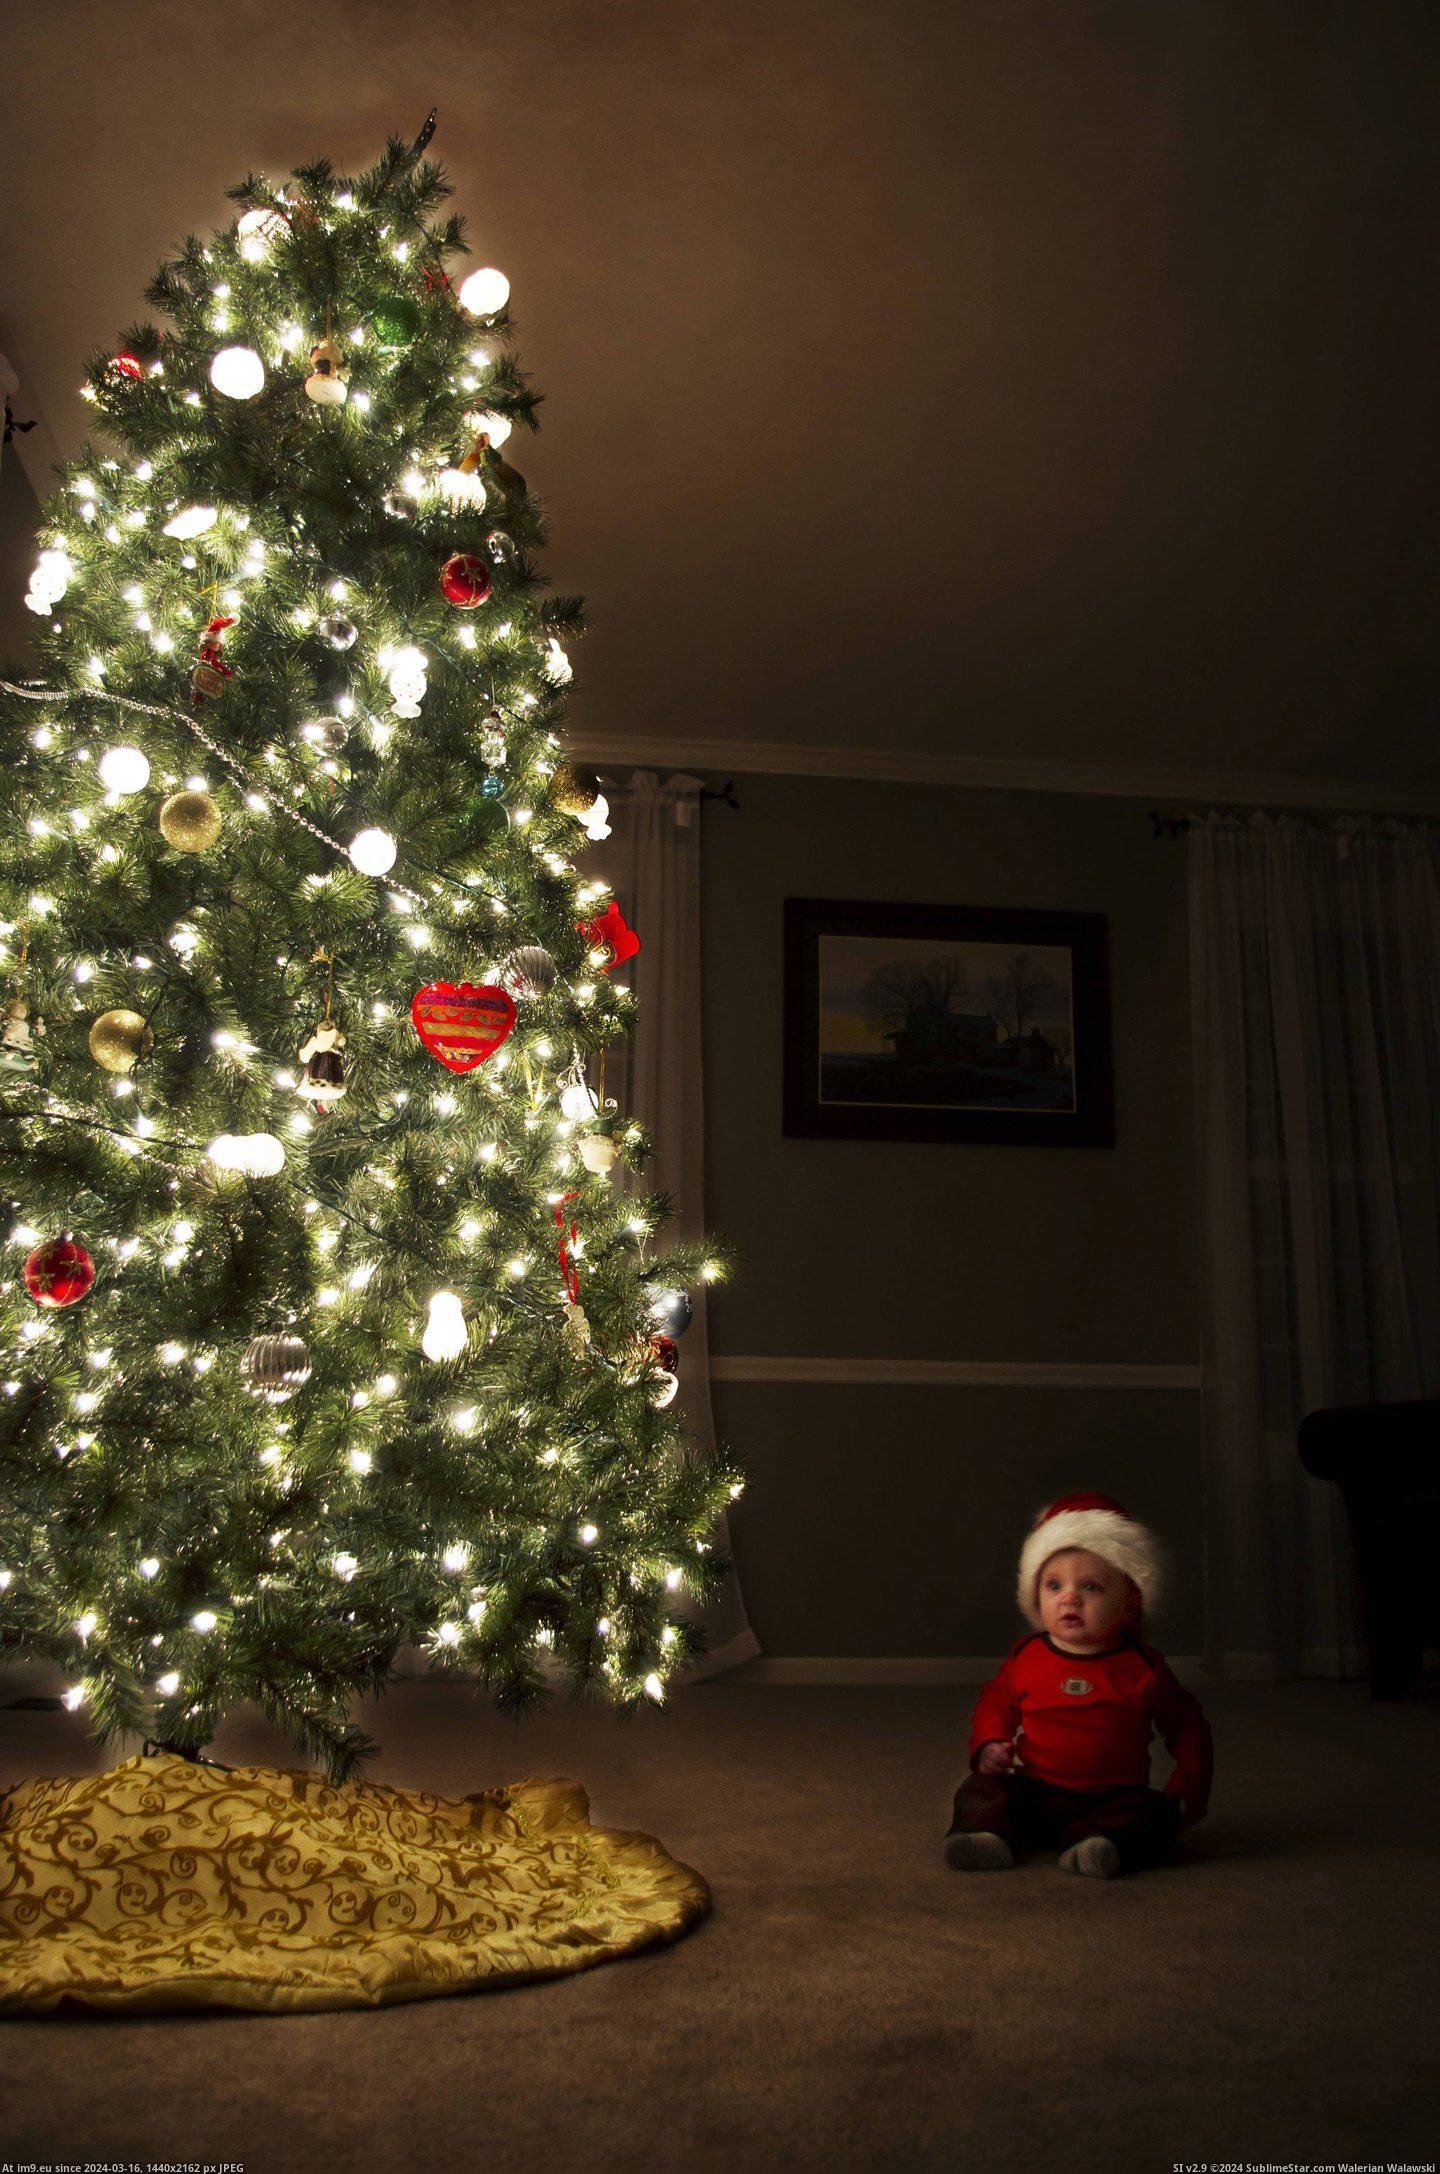 #Was #Good #Shot #Wanted #Him #Son #Metric #Out #Christmas #Get [Pics] My first post. This is my son's first Christmas and I wanted to get a good shot of him. This was the best out of a metric Pic. (Bild von album My r/PICS favs))